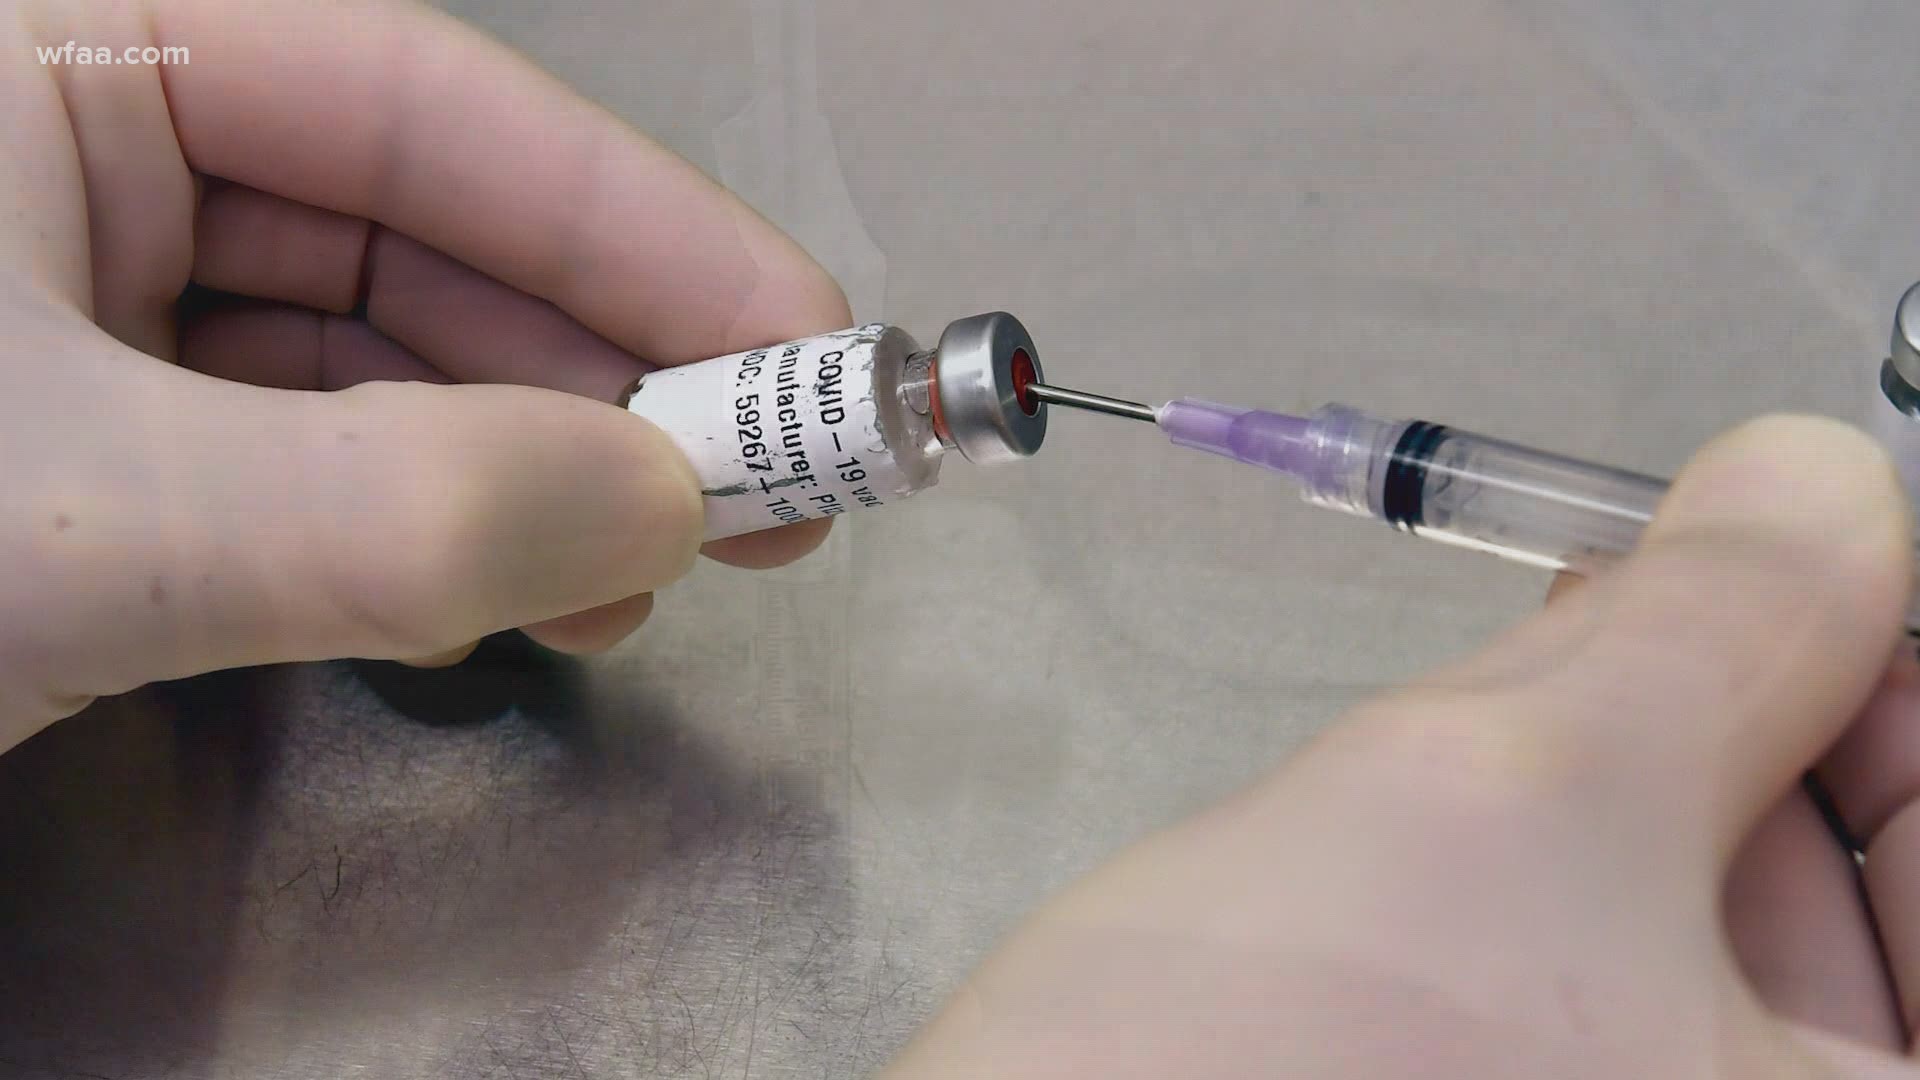 Health experts believe the antibodies from the vaccine will last longer than those from contracting the disease.